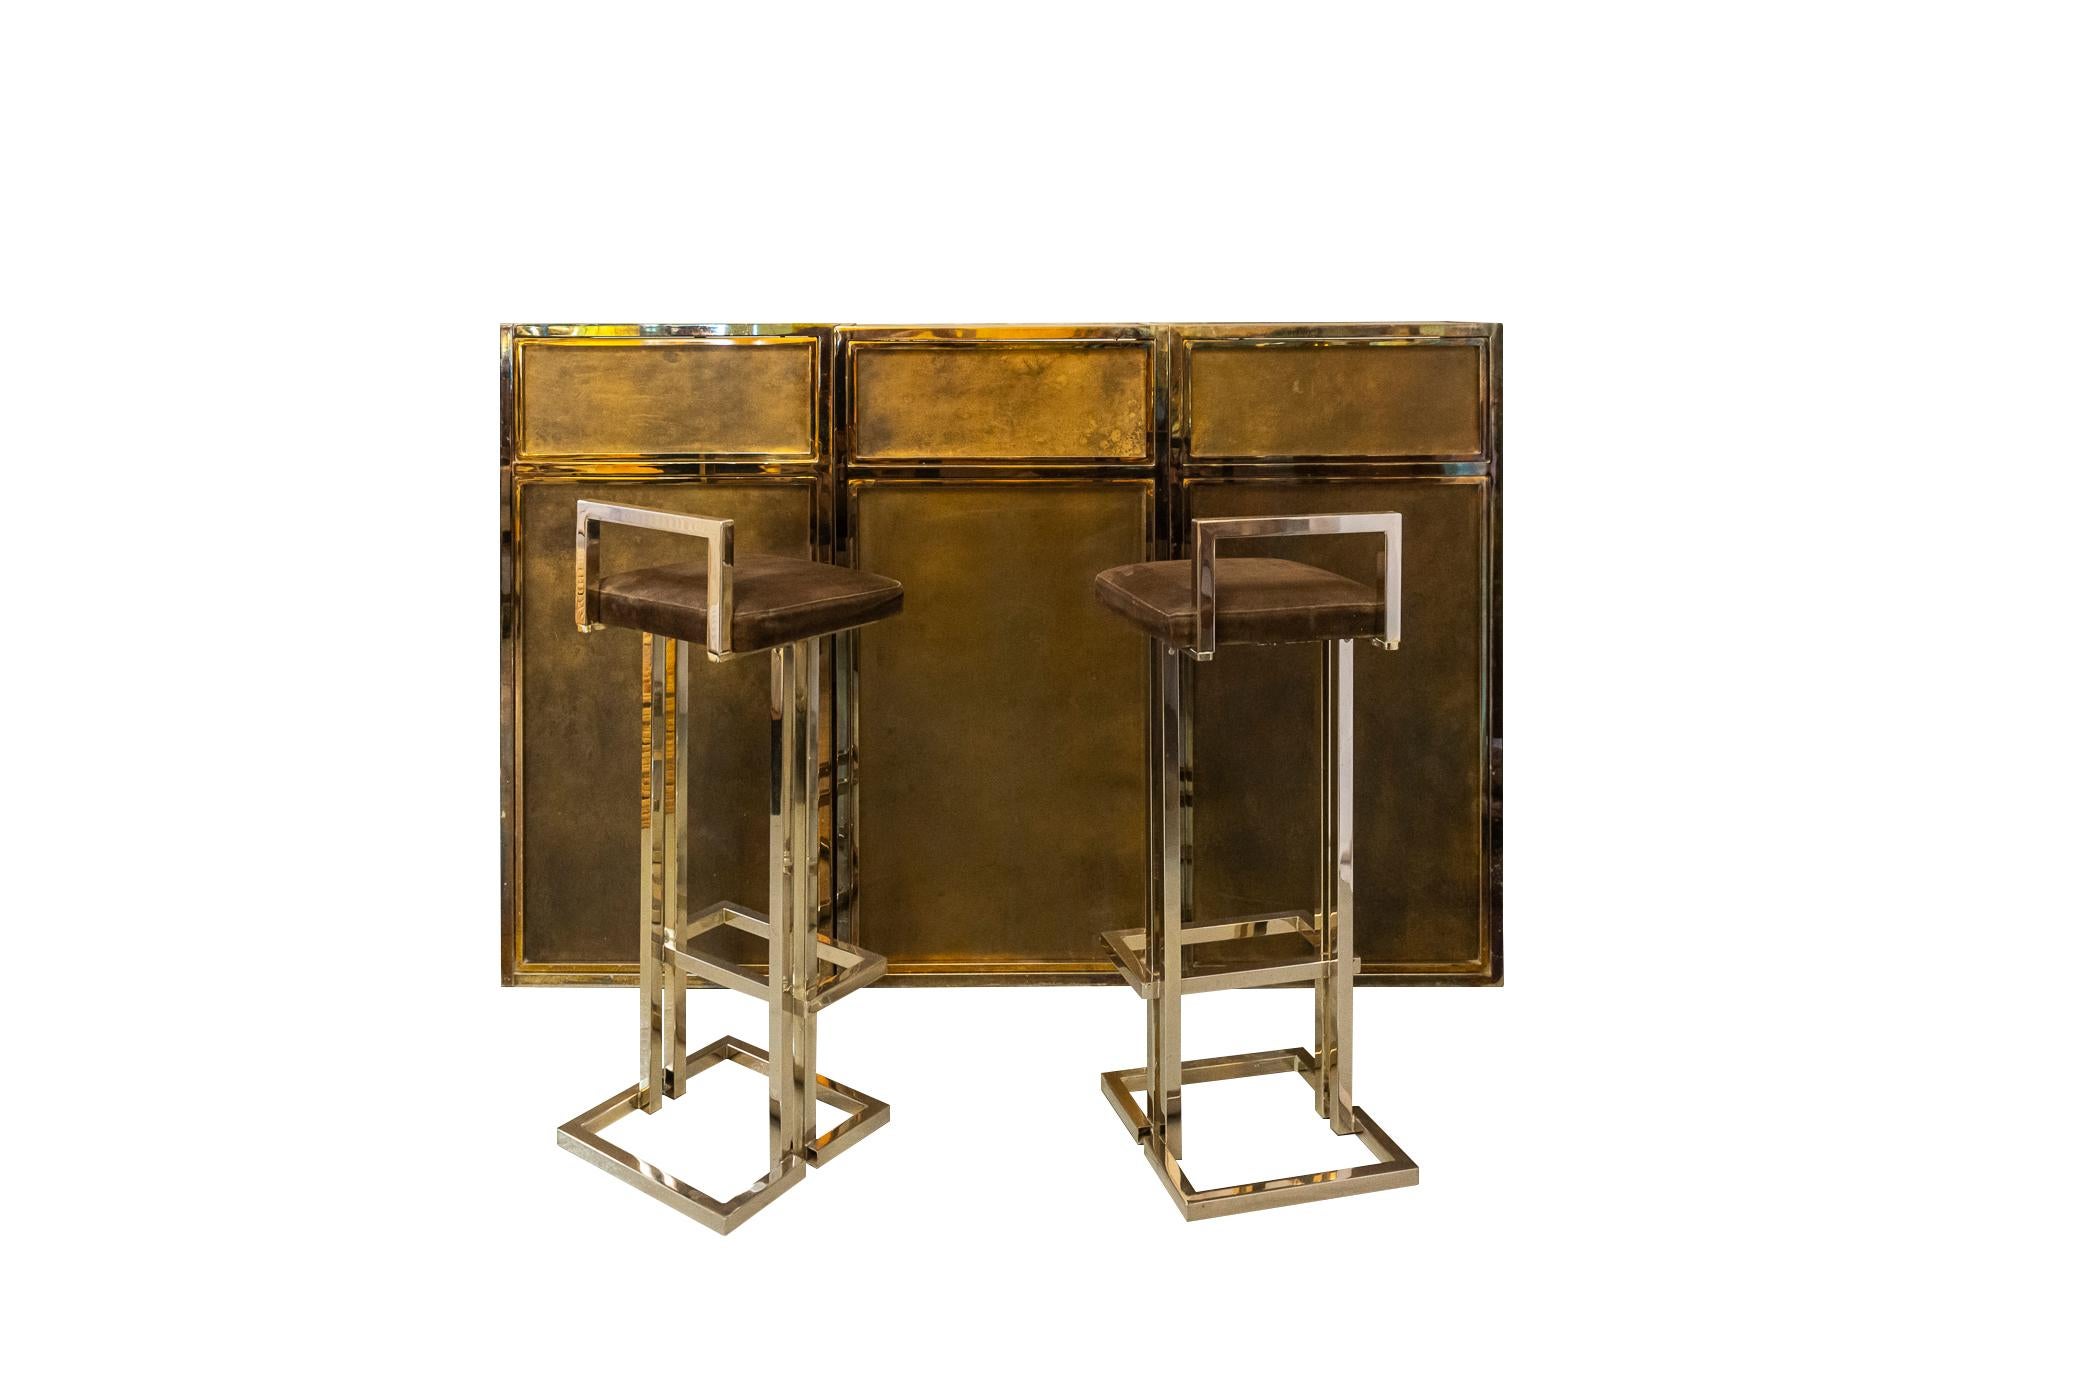 Maison Jansen,
Hollywood regency 3-module bar counter with two matching bar stools, 
brass frame and panels in burnished copper,
France, circa 1970.

Measures: 
(Bar) 180 x 60 x 120 cm.
(Stools) 36 x 37 x 95 cm.